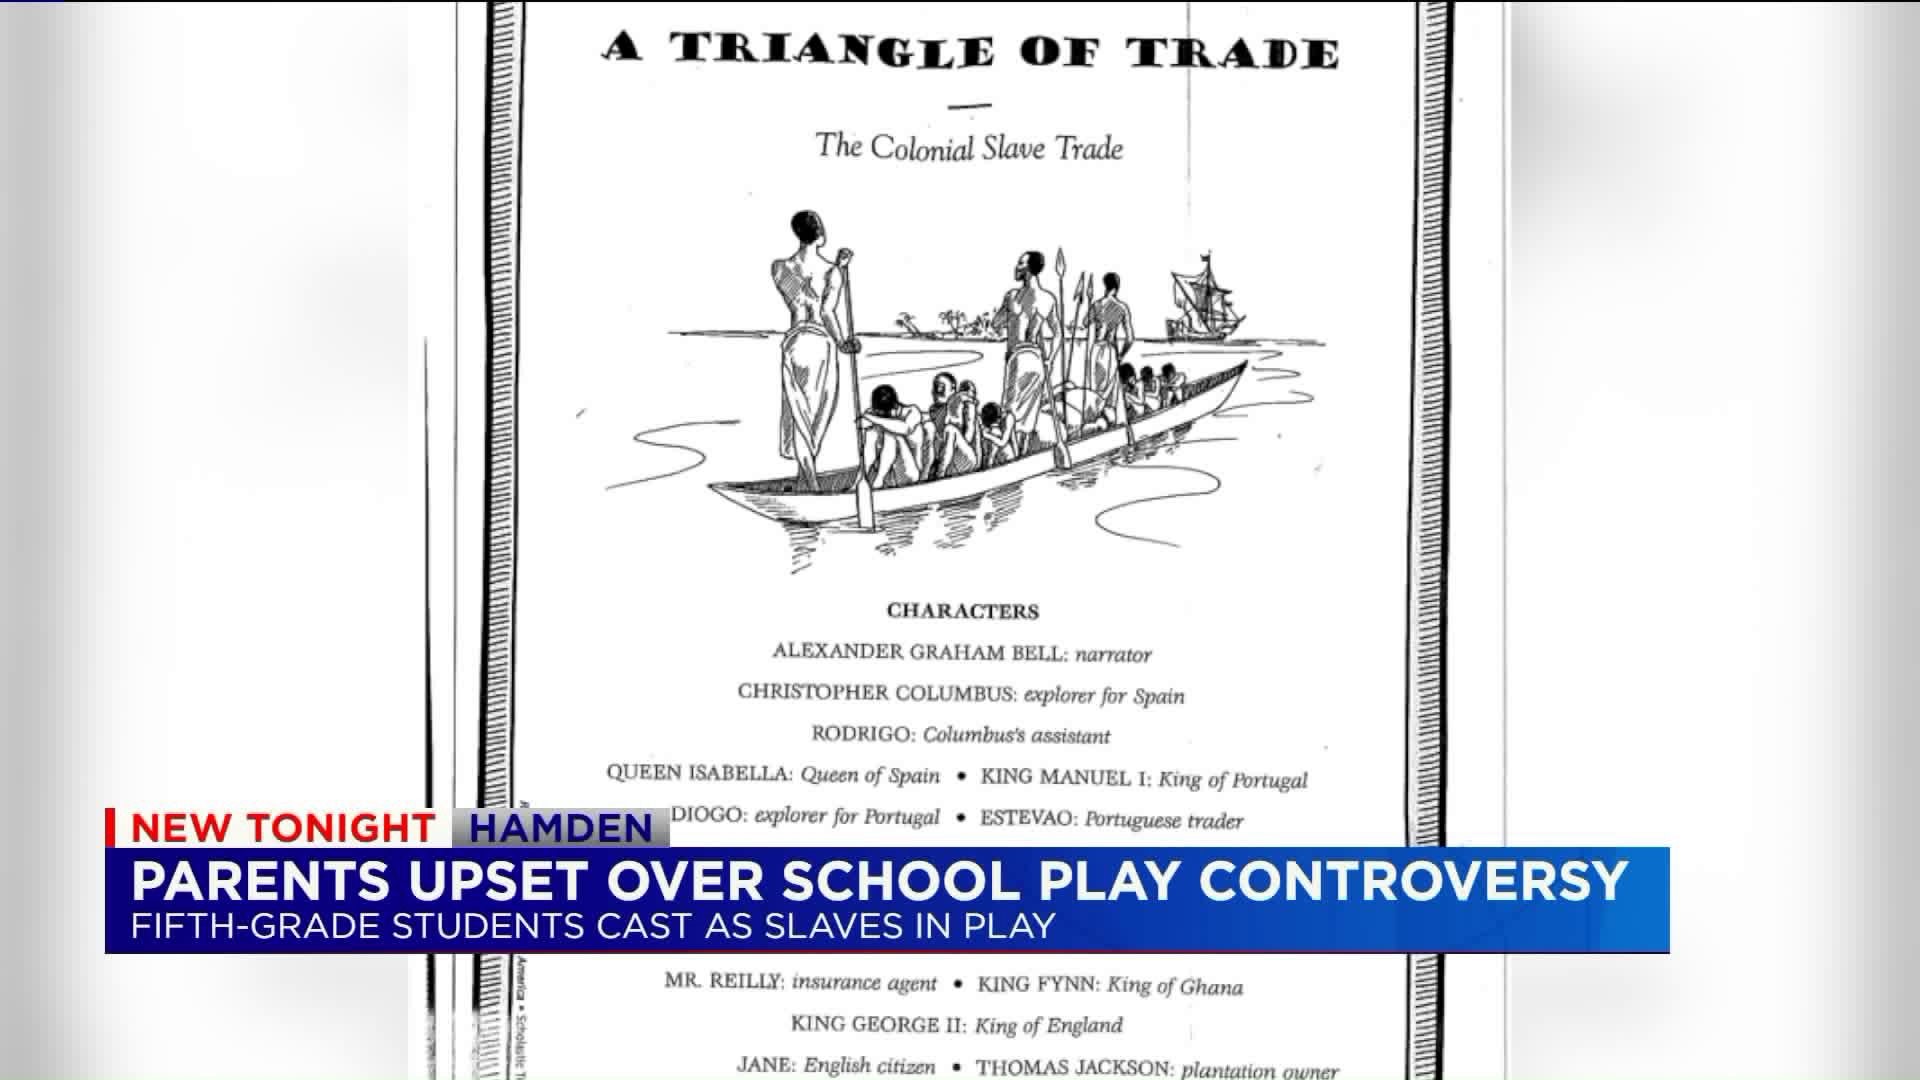 Hamden parents say 10-year-old daughter cast as slave in school play